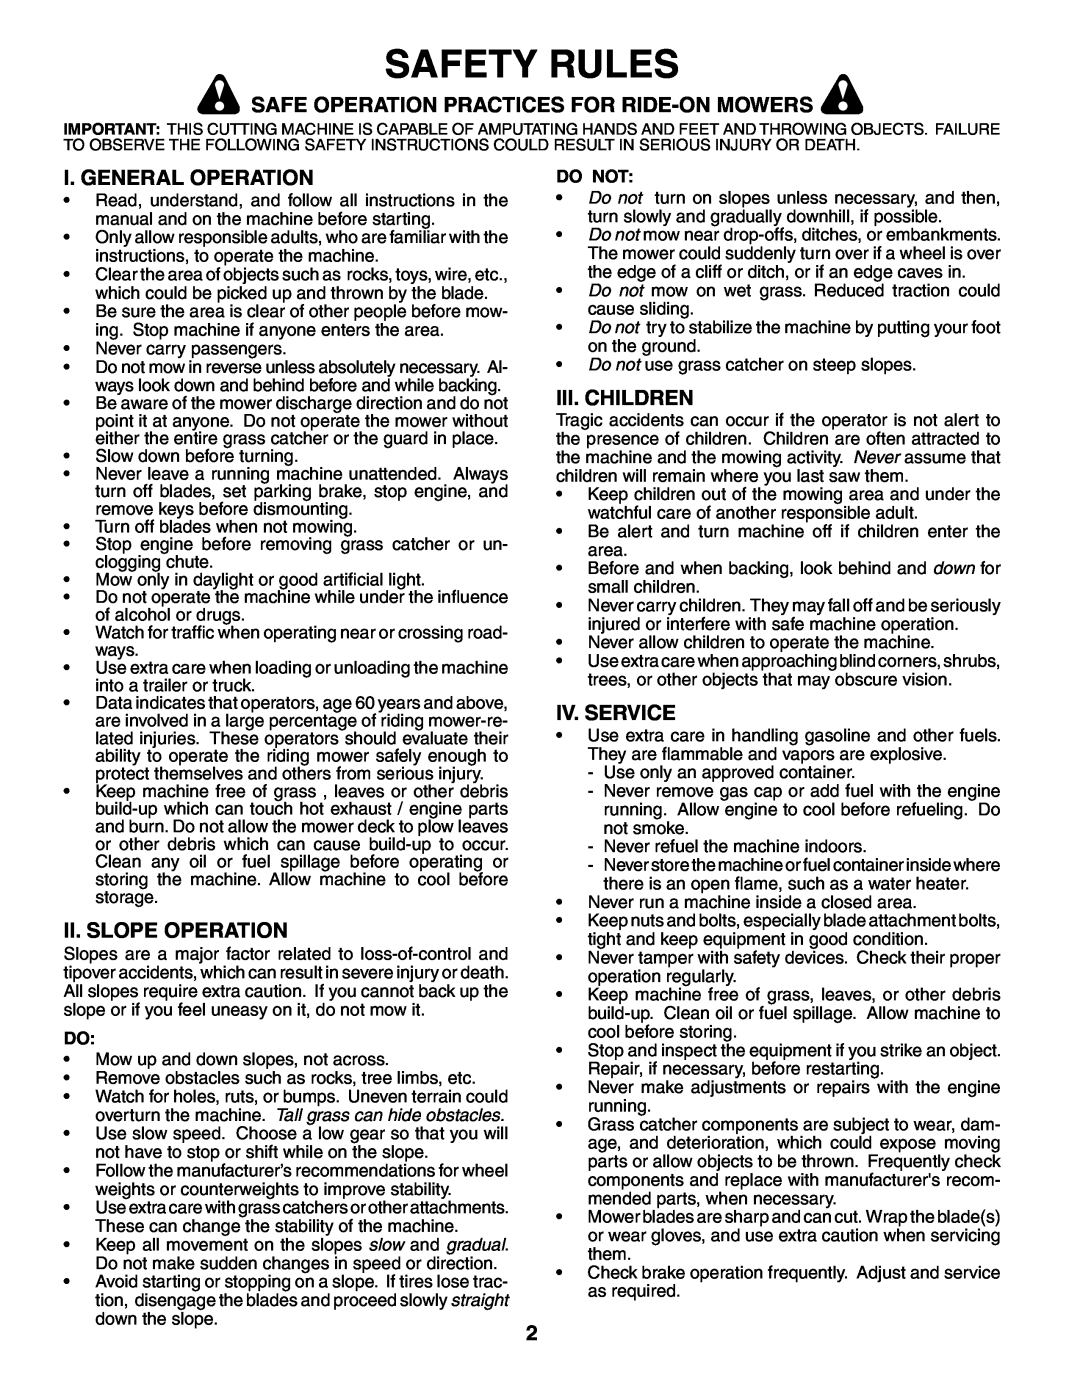 Poulan 191984 manual Safety Rules, Safe Operation Practices For Ride-On Mowers, I. General Operation, Ii. Slope Operation 